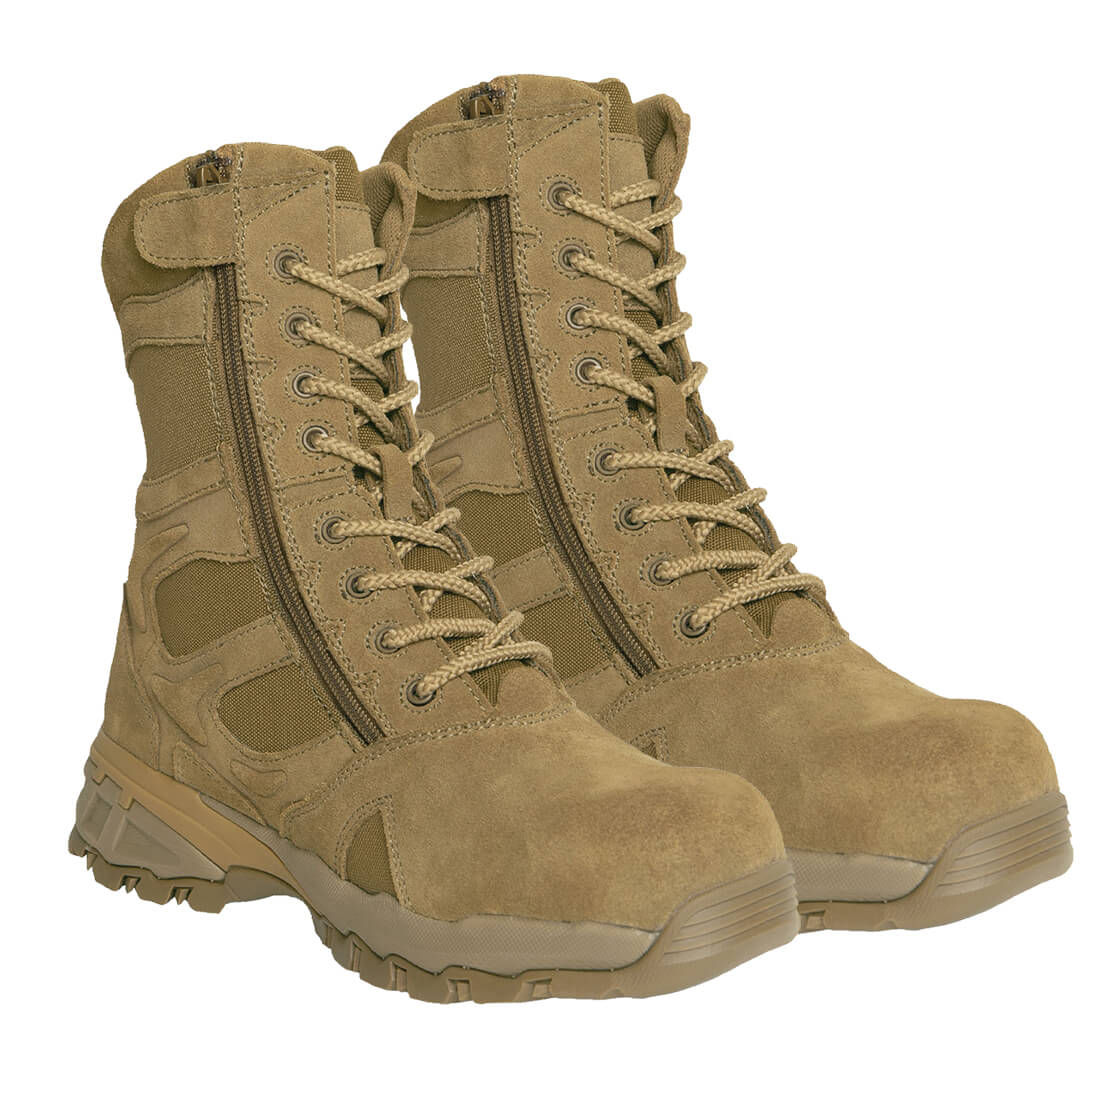 Rothco Forced Entry Composite Toe AR 670-1 Coyote Brown Tactical Boot